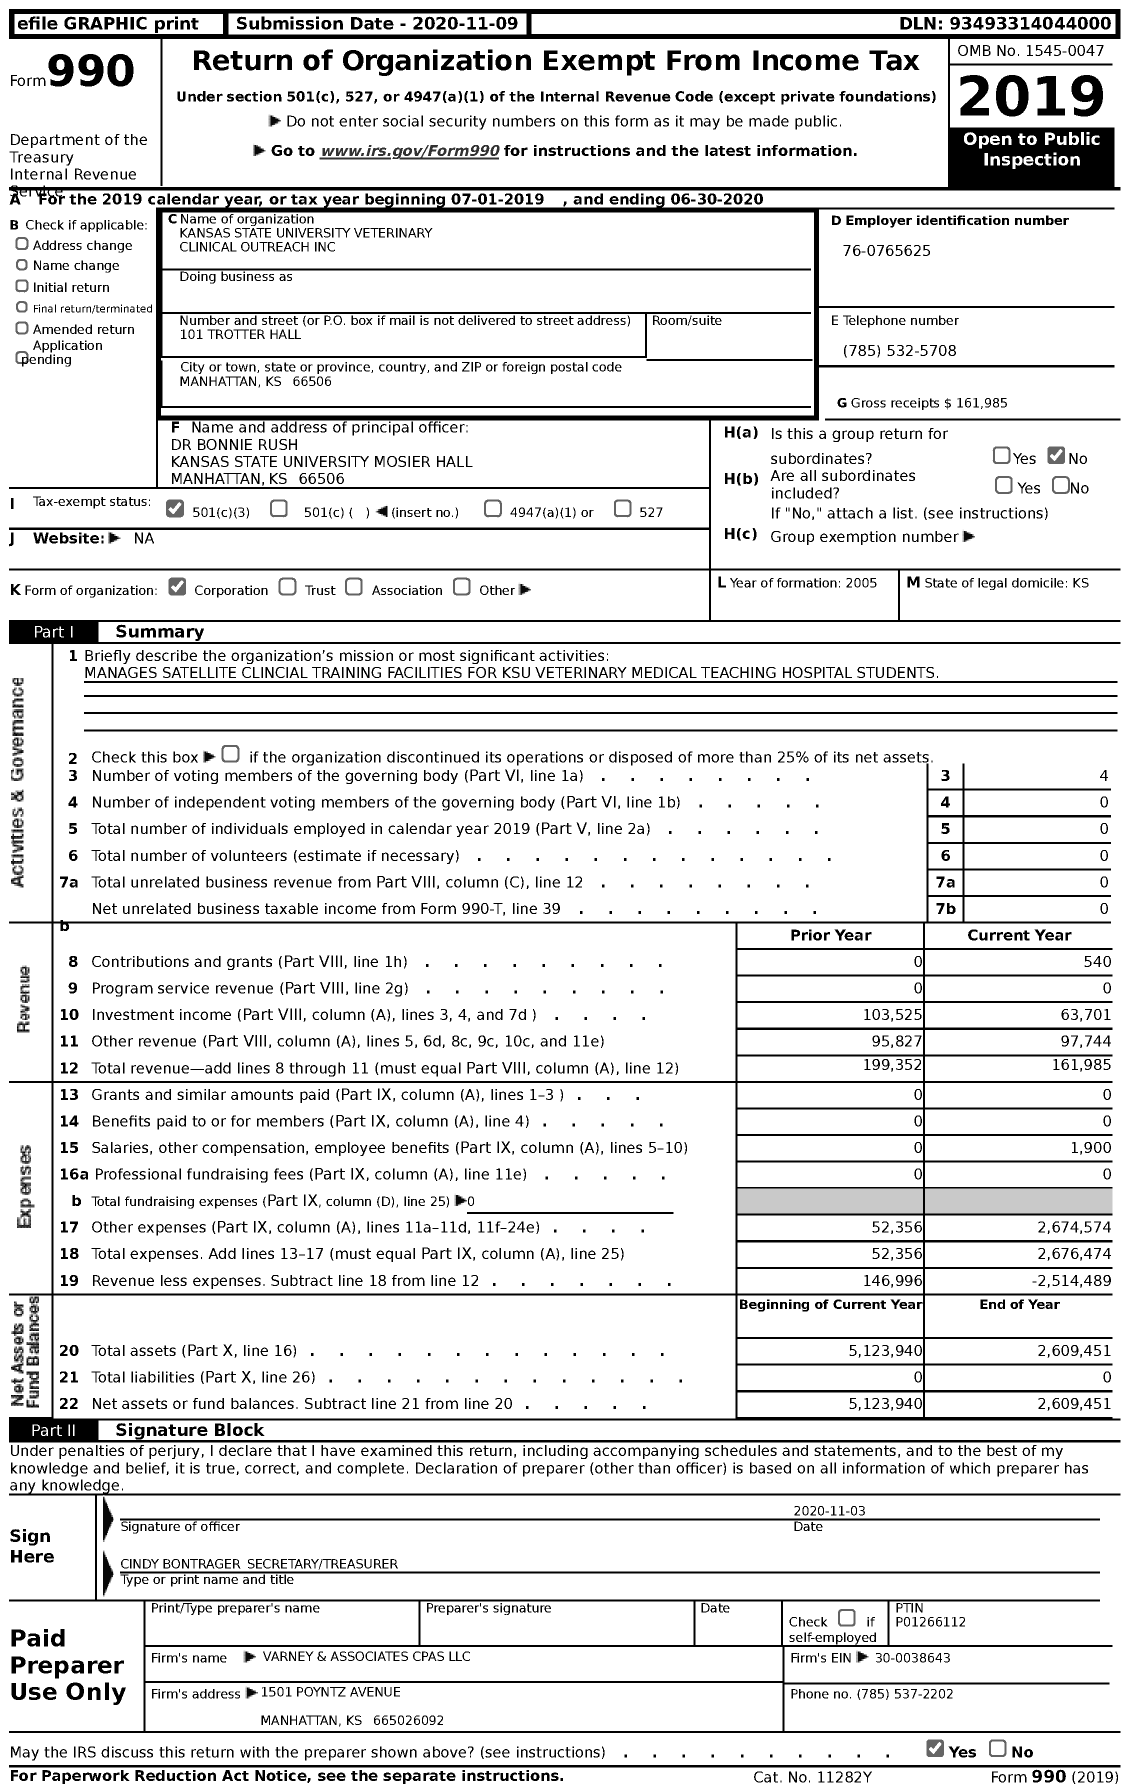 Image of first page of 2019 Form 990 for Kansas State University Veterinary Clinical Outreach